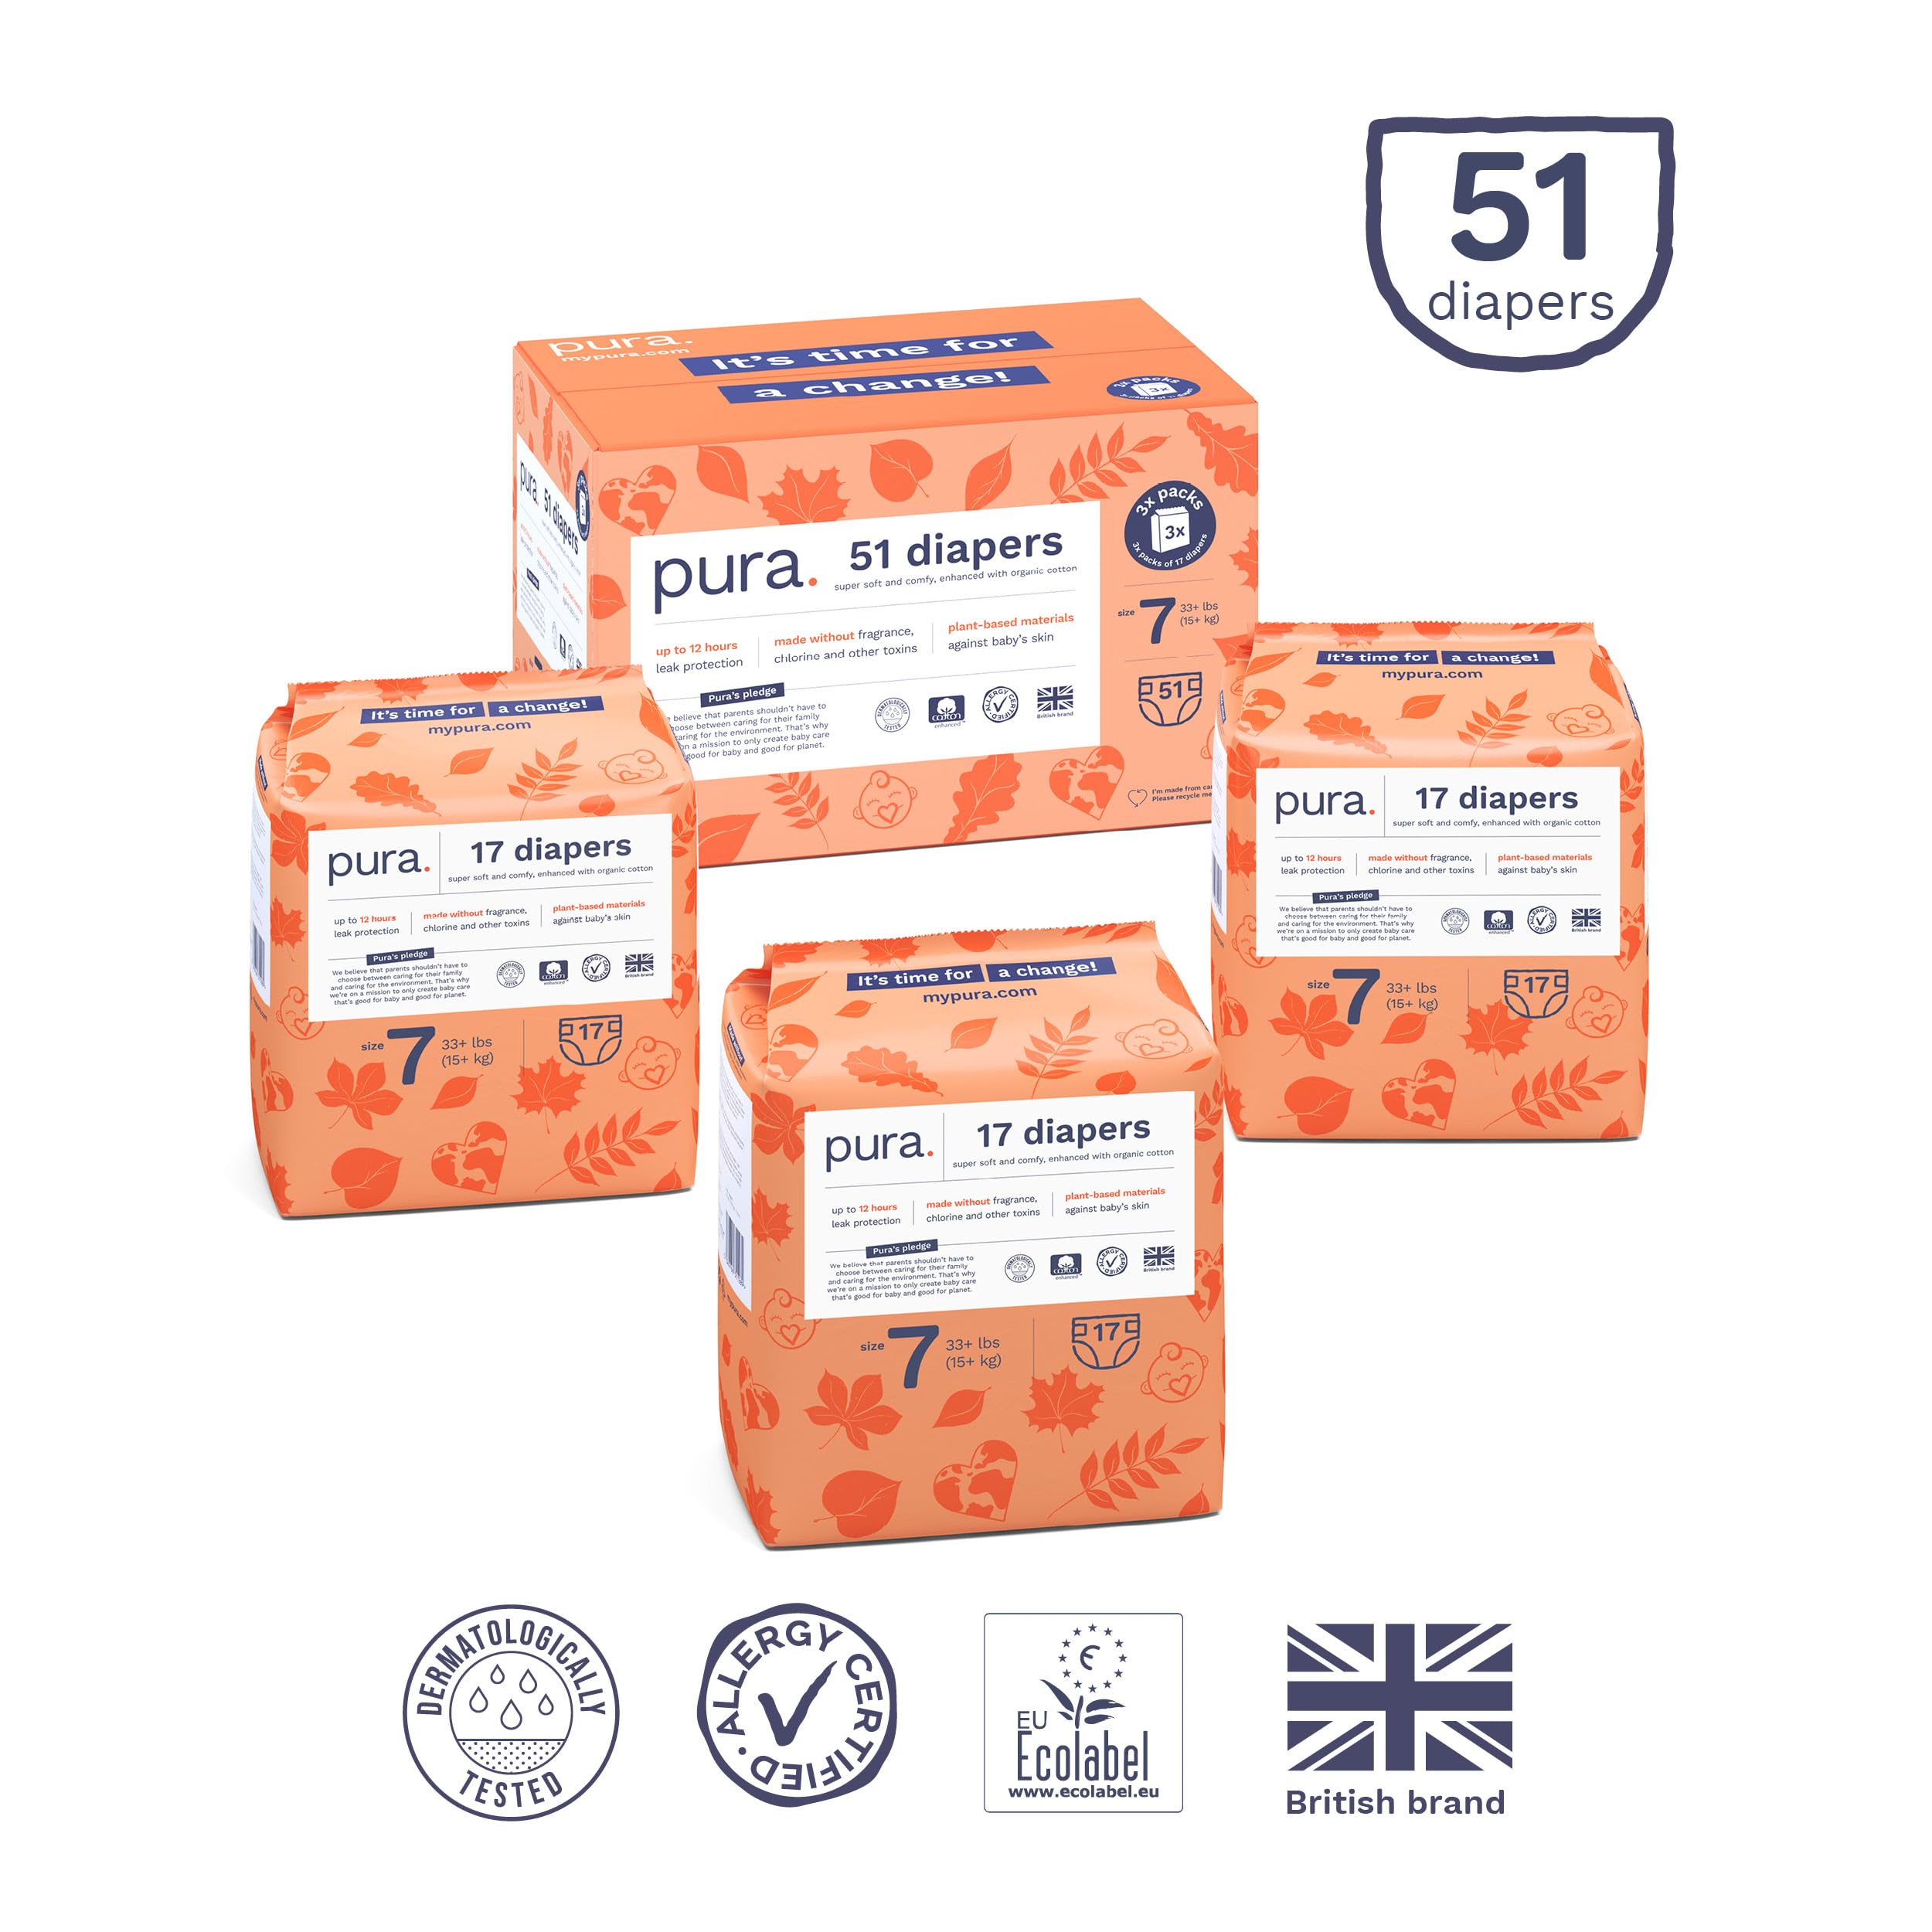 Pura Size 7 Eco-Friendly Diapers (33+lbs) Hypoallergenic, Soft Organic Cotton, Sustainable, up to 12 Hours Leak Protection, Allergy UK, Recyclable Paper Packaging, 3 Packs of 17 (51 Diapers)